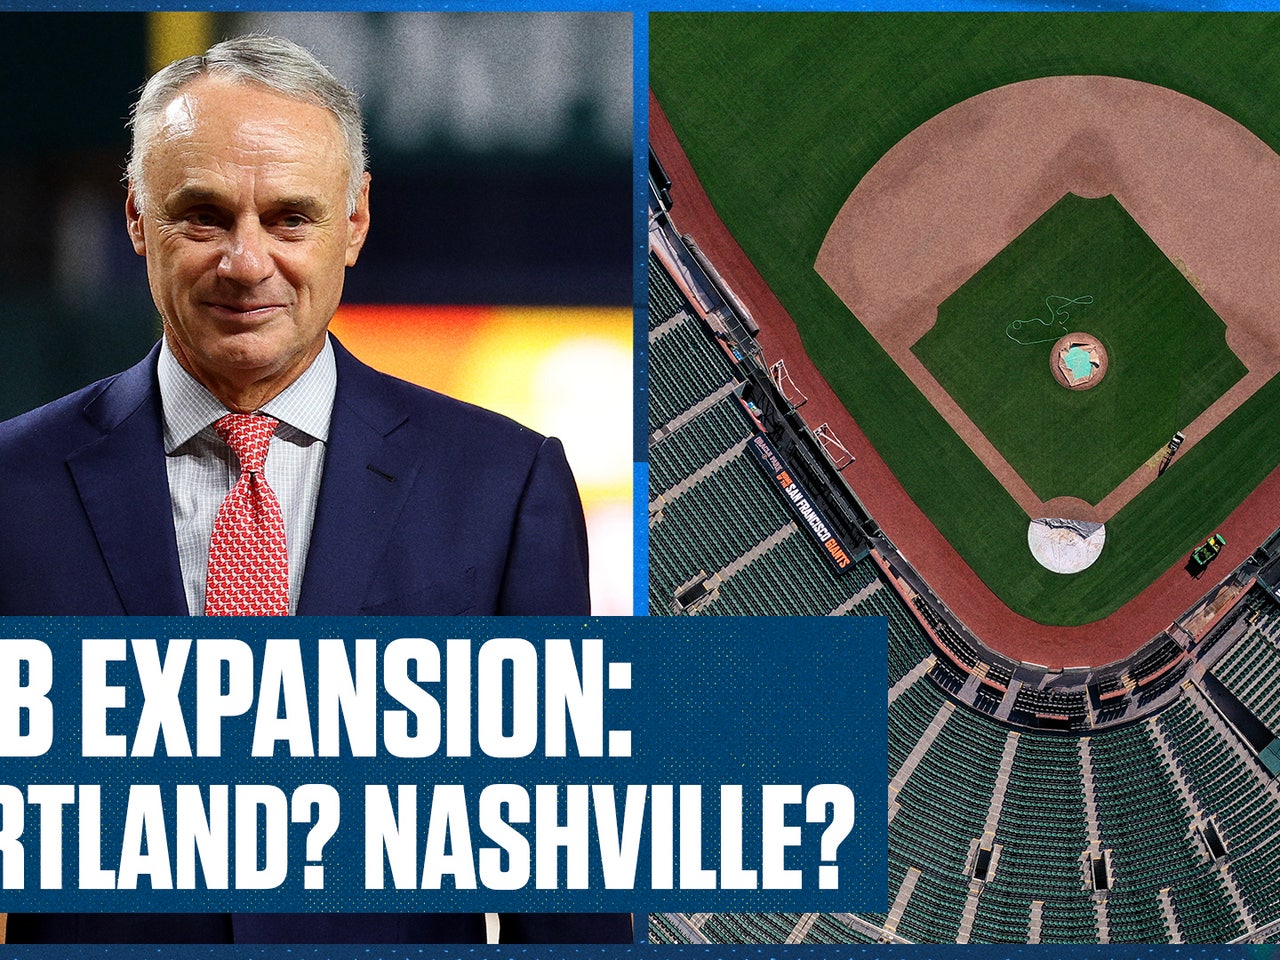 MLB players say Nashville is best spot for expansion, Montreal second